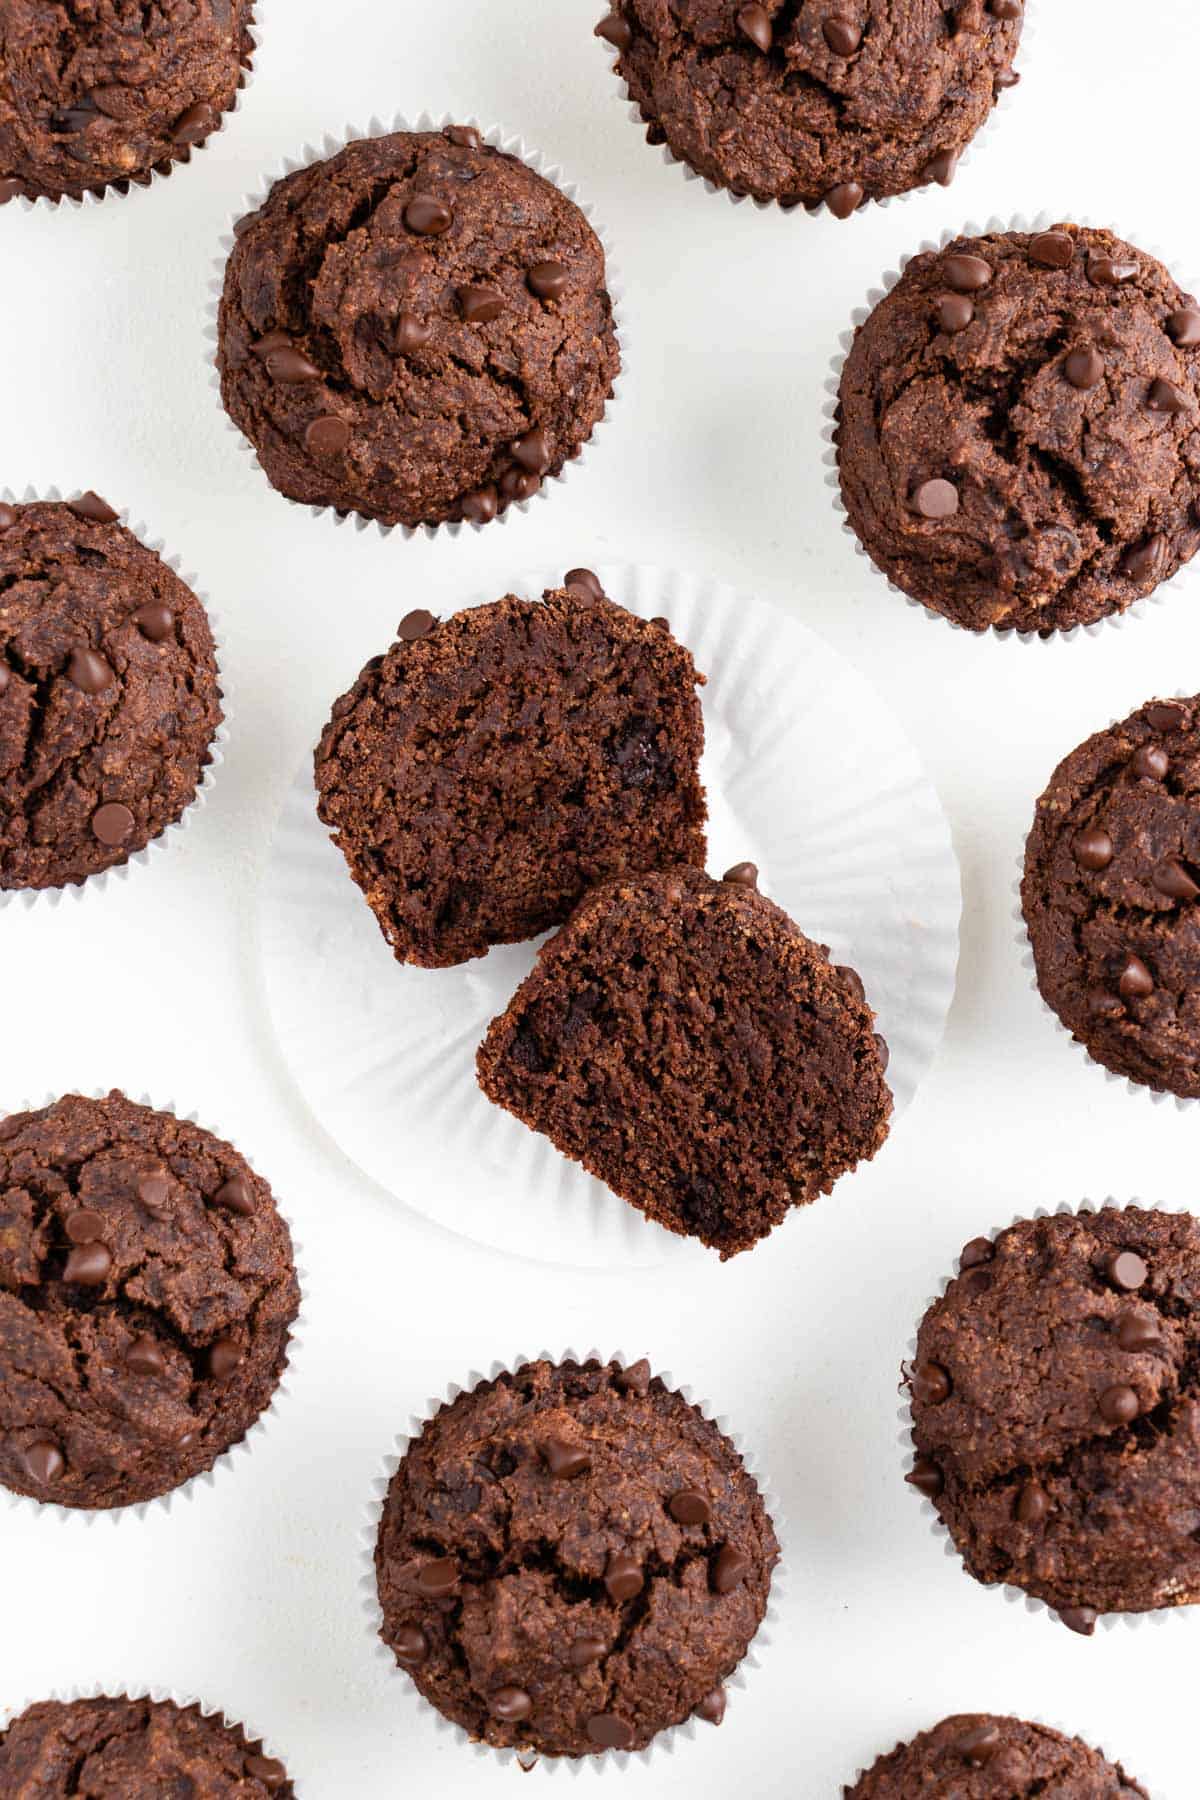 double chocolate banana muffins vegan and gluten-free with the center muffin sliced in half